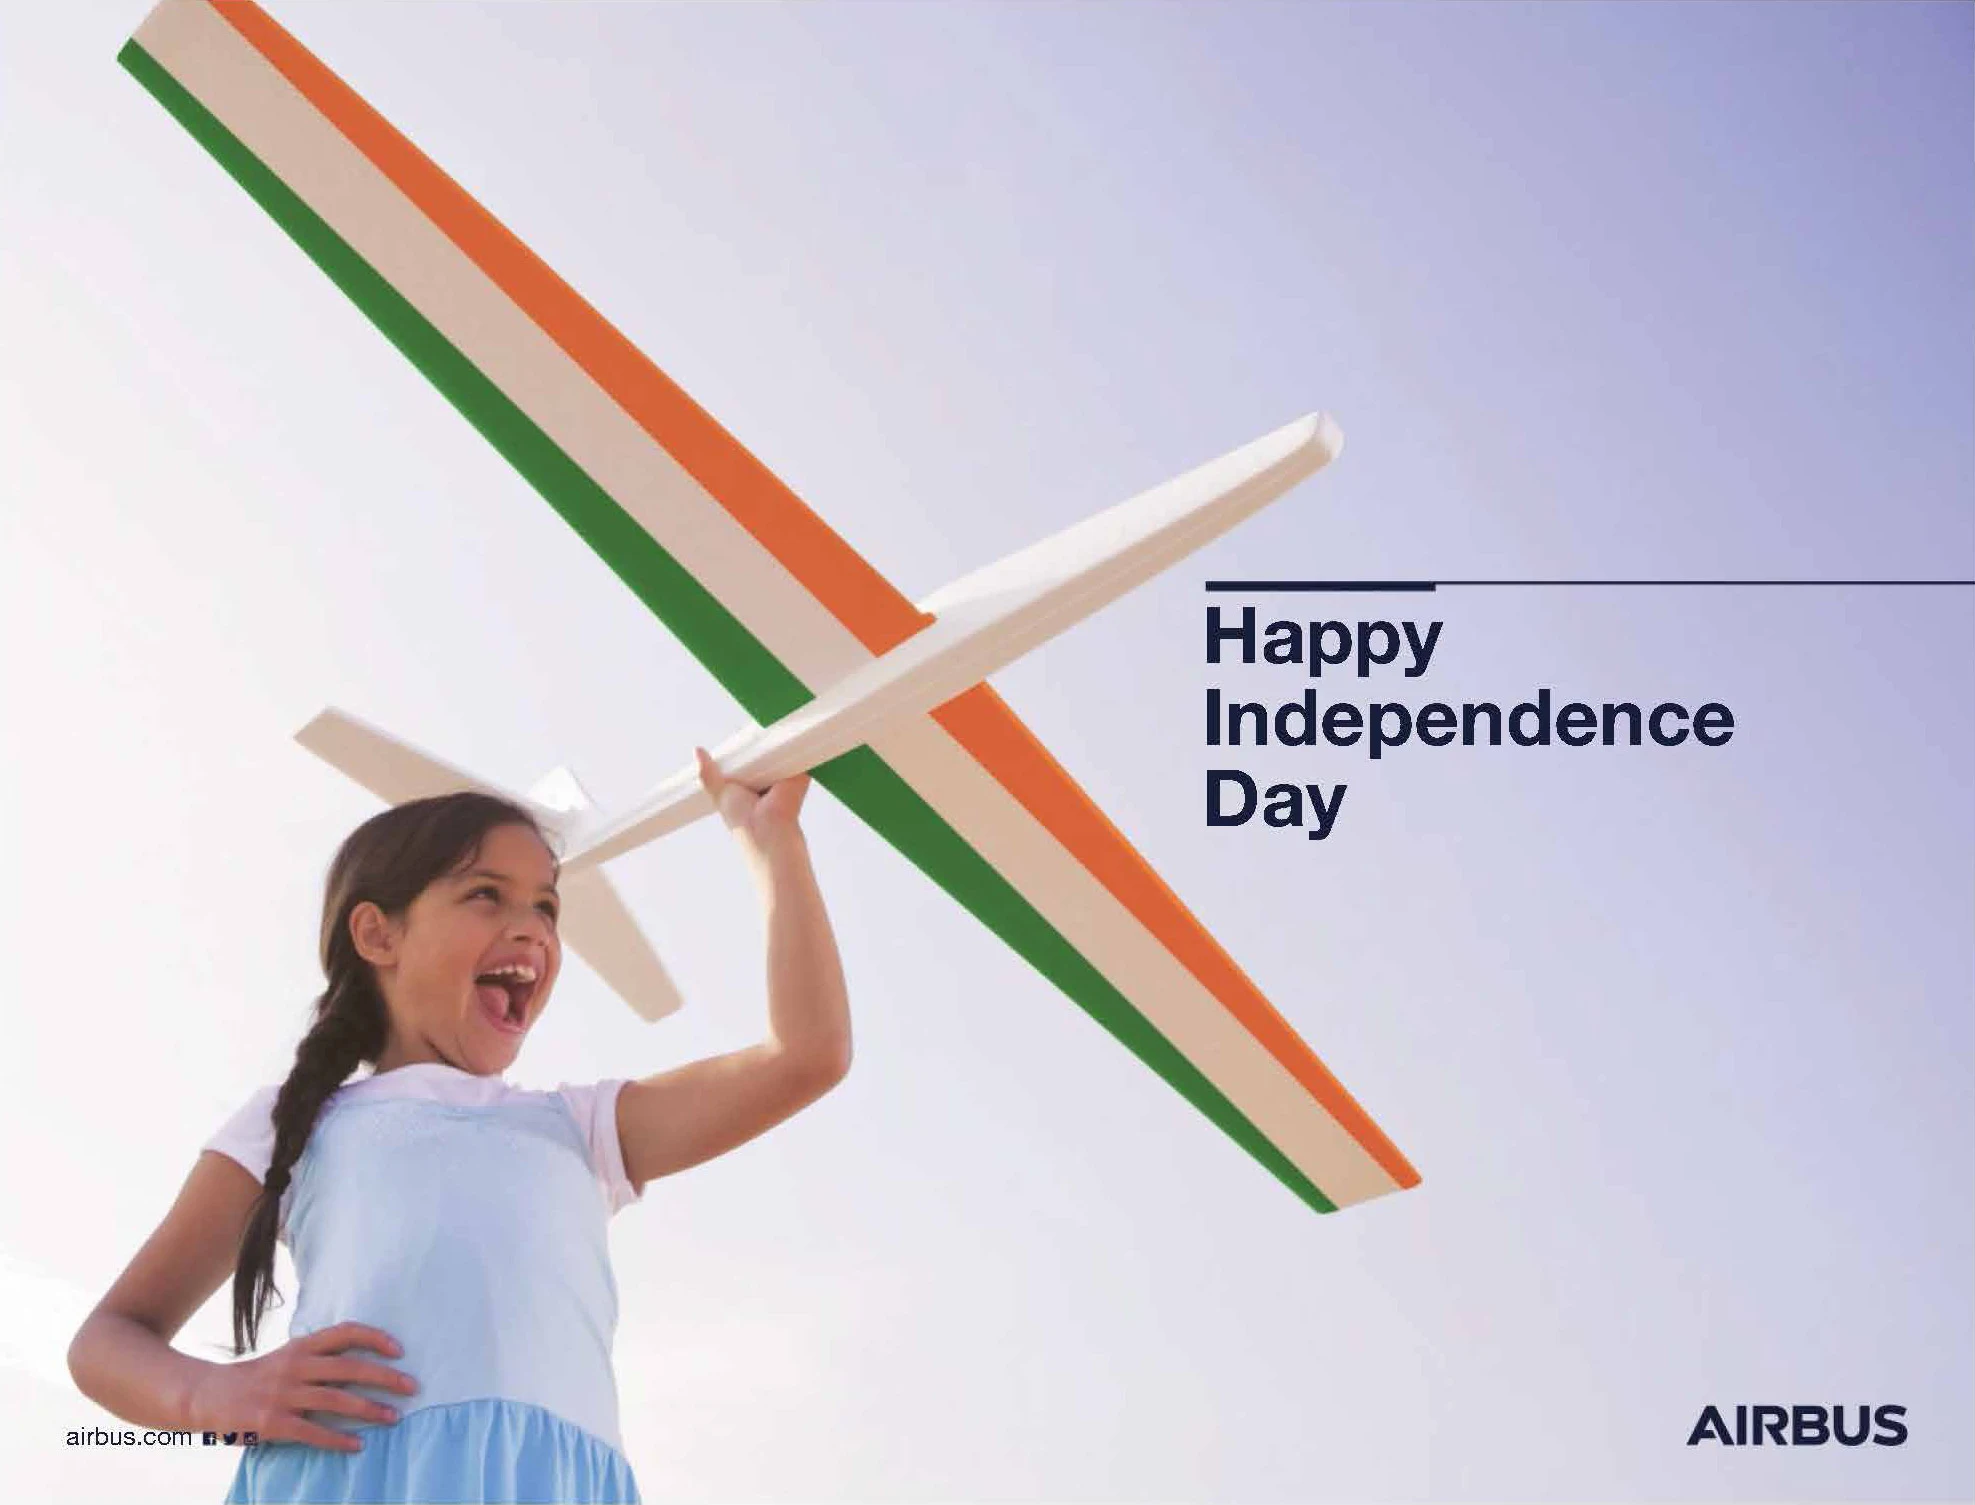 #20 Airbus Wishes Happy Independence Day